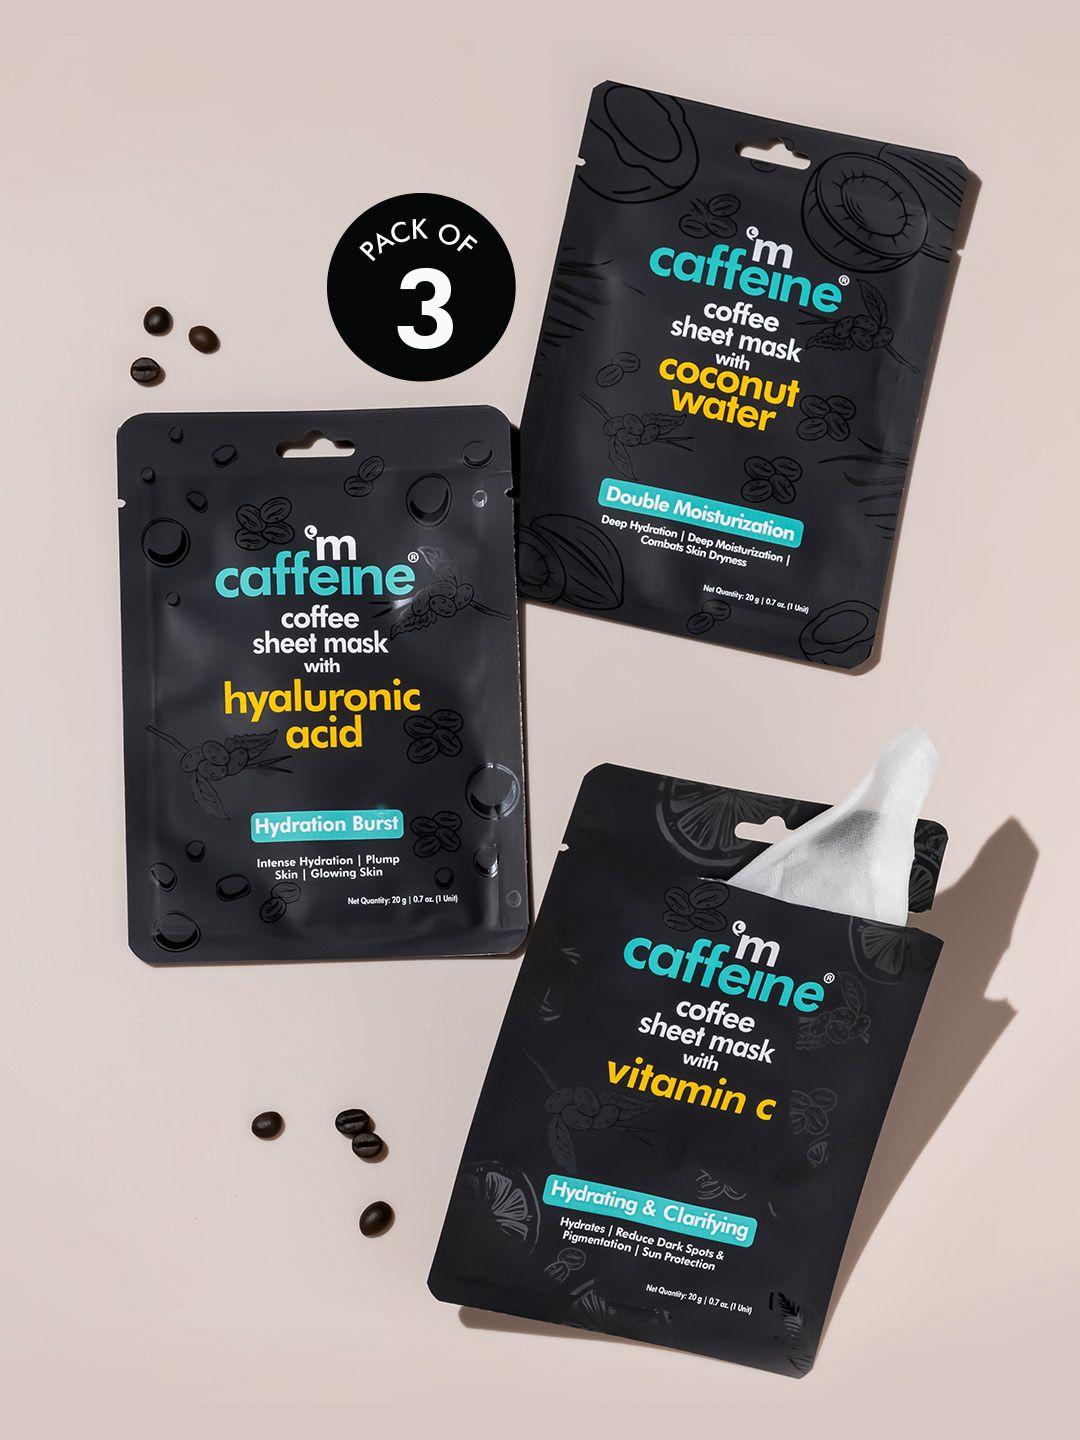 mcaffeine set of 3 coffee sheet masks with vit c, hyaluronic acid & coconut water-20g each